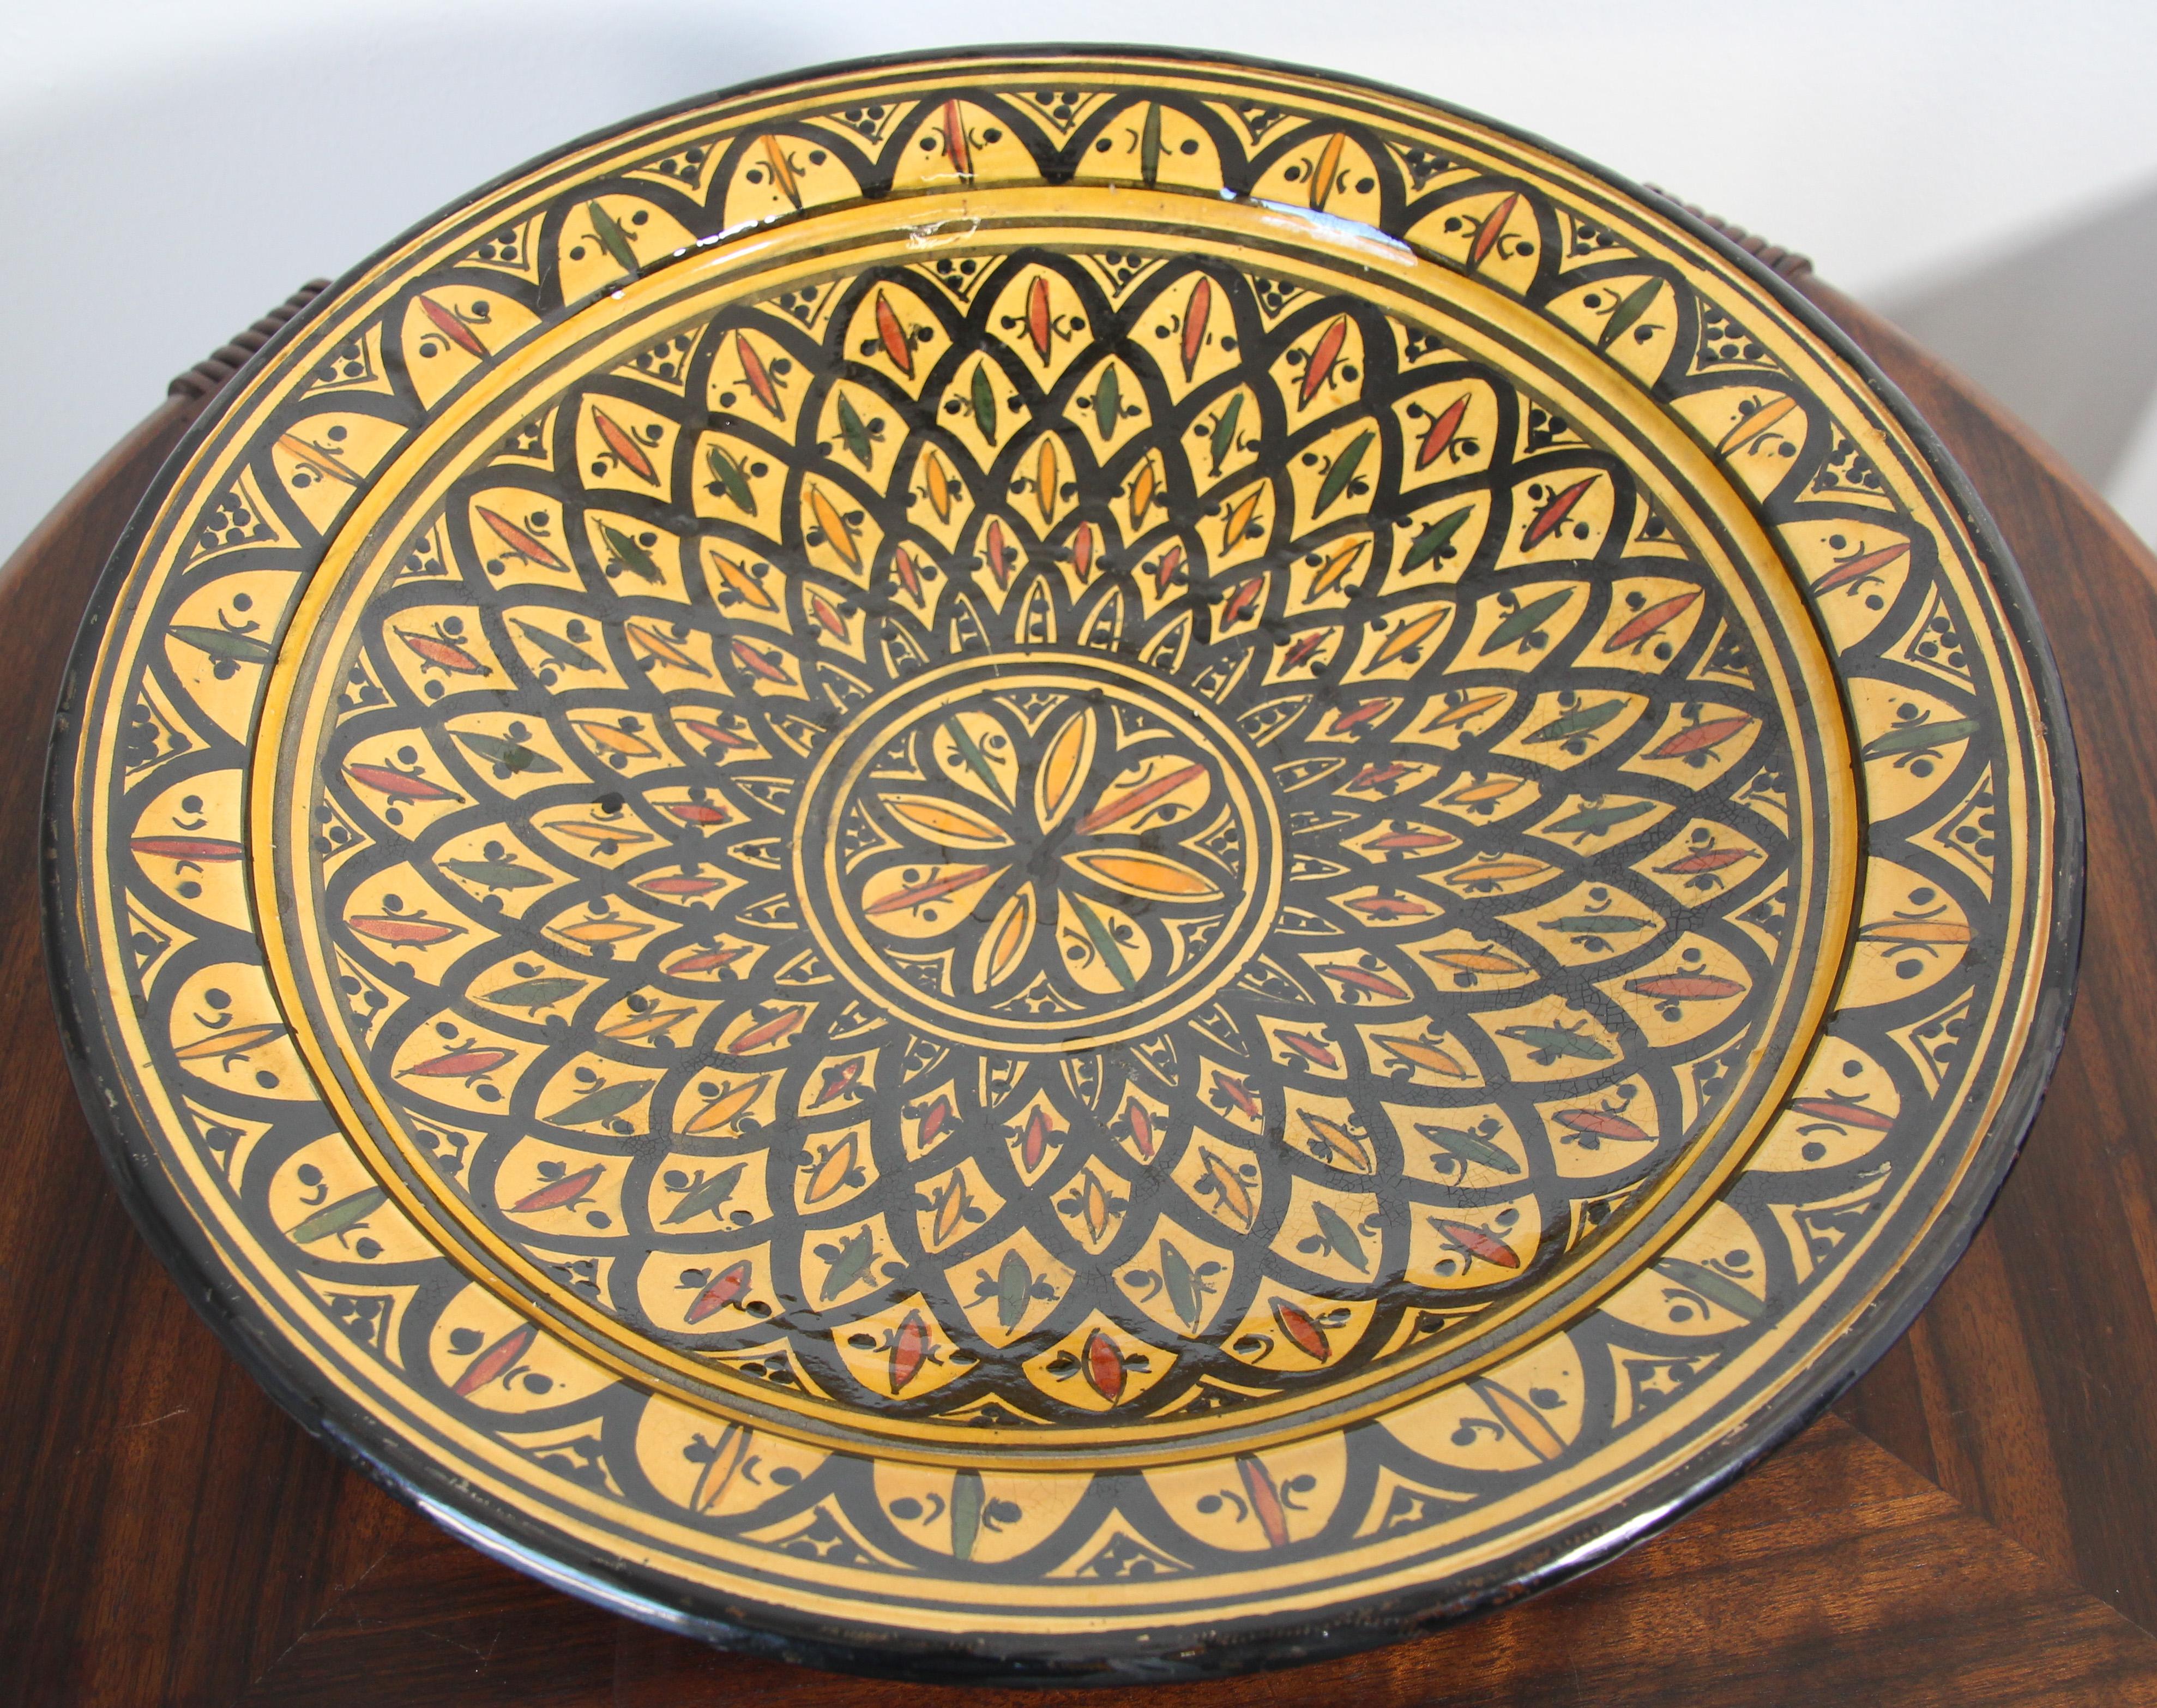 Handcrafted Moroccan hand-painted glazed ceramic plate with a yellow background and adorned with geometric black Moorish designs.
Signed in the back in Arabic “Safi